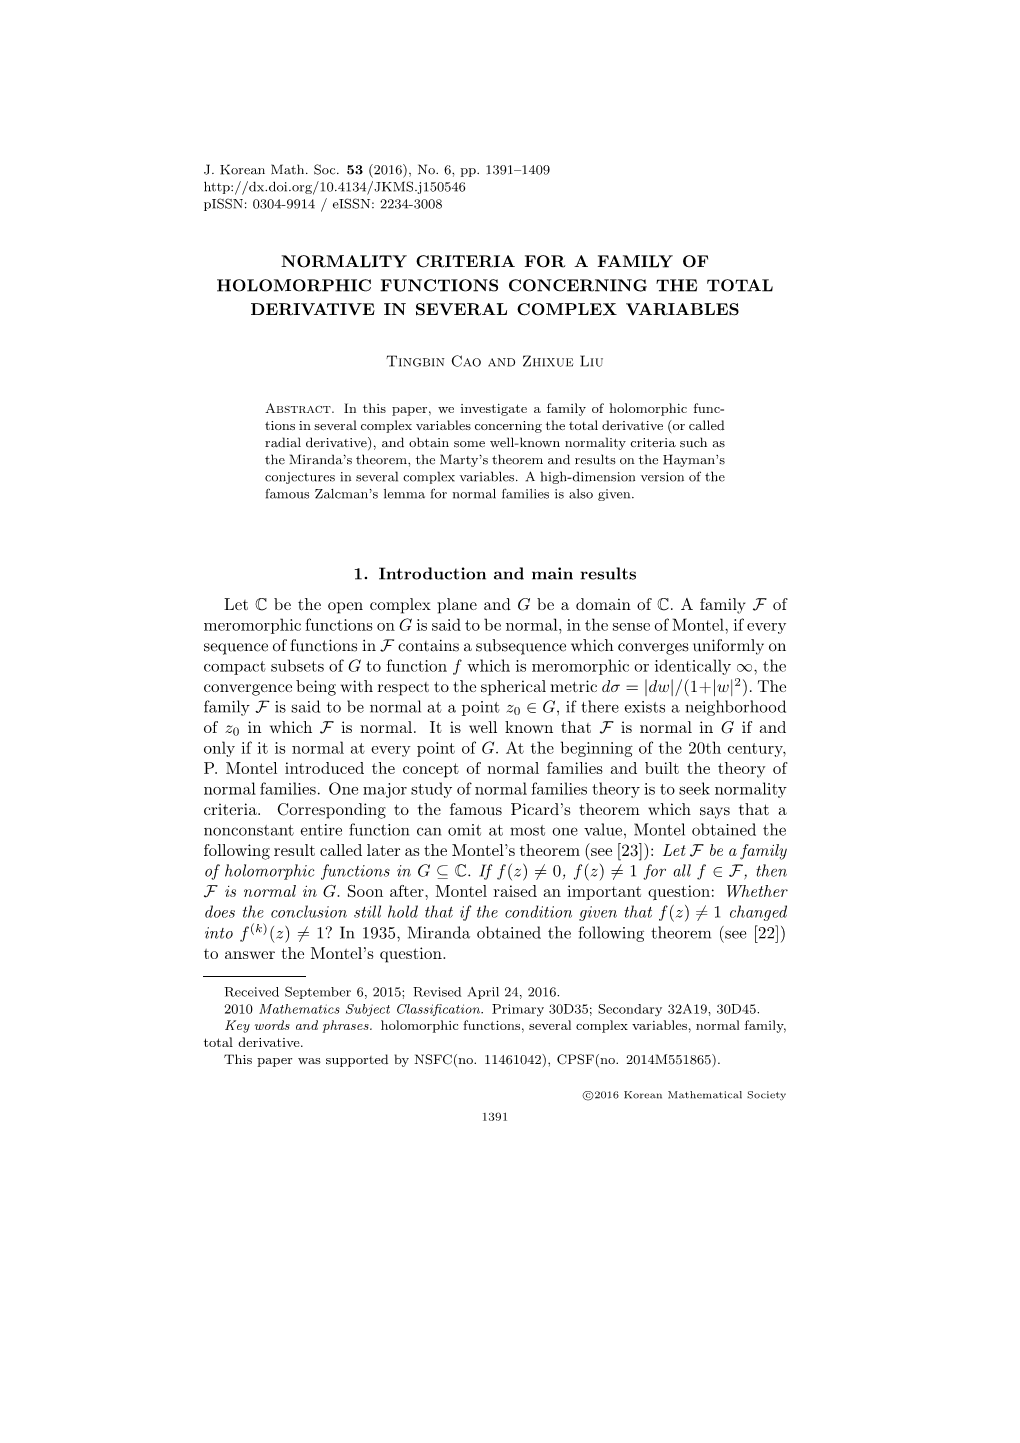 Normality Criteria for a Family of Holomorphic Functions Concerning the Total Derivative in Several Complex Variables